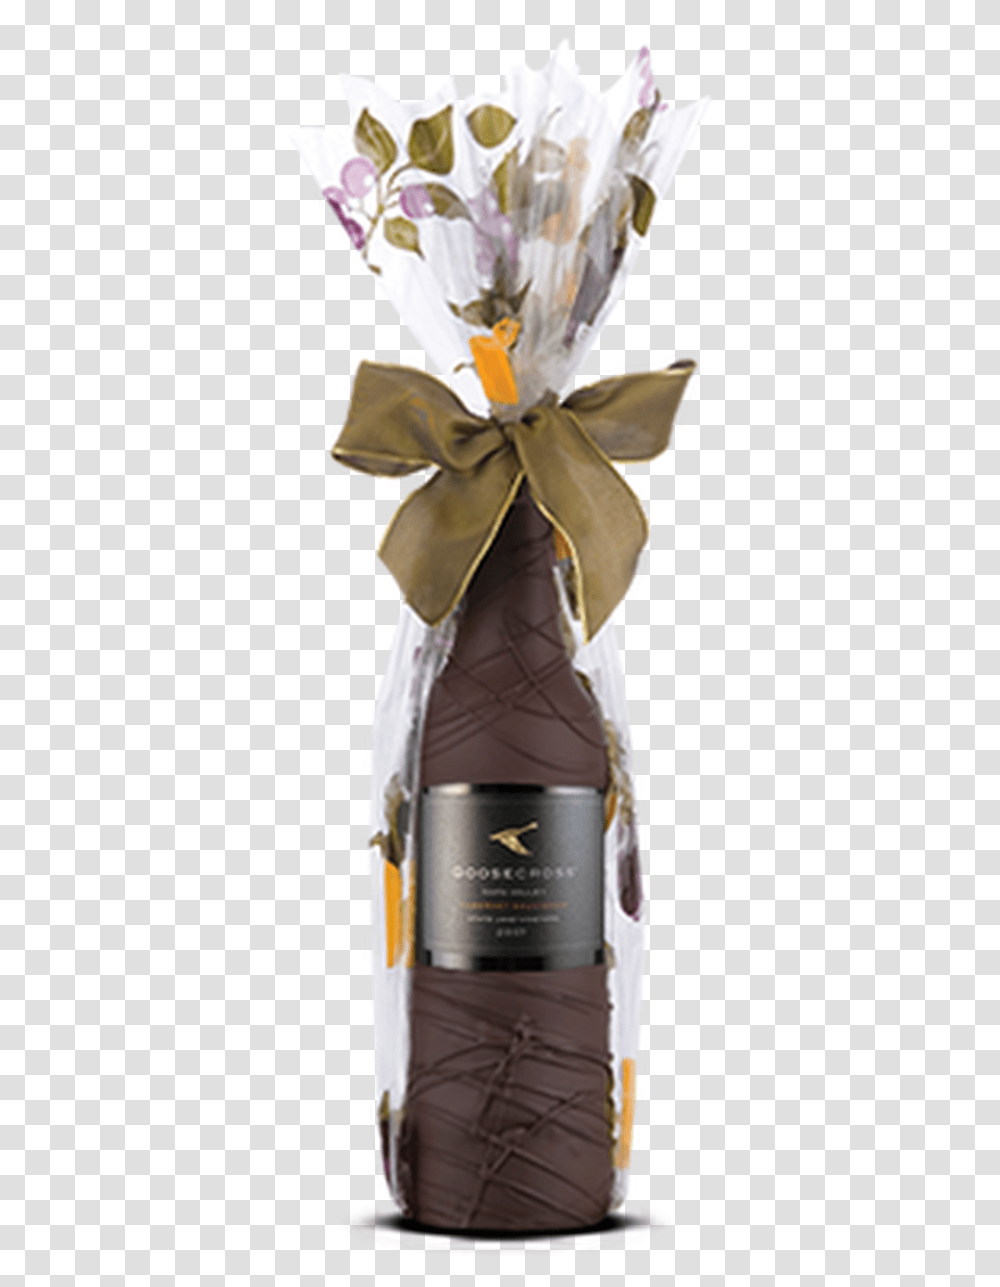 Chocolate Dipped Covered Wine Or Champagne Bottle Glass Bottle, Apparel, Beverage, Drink Transparent Png